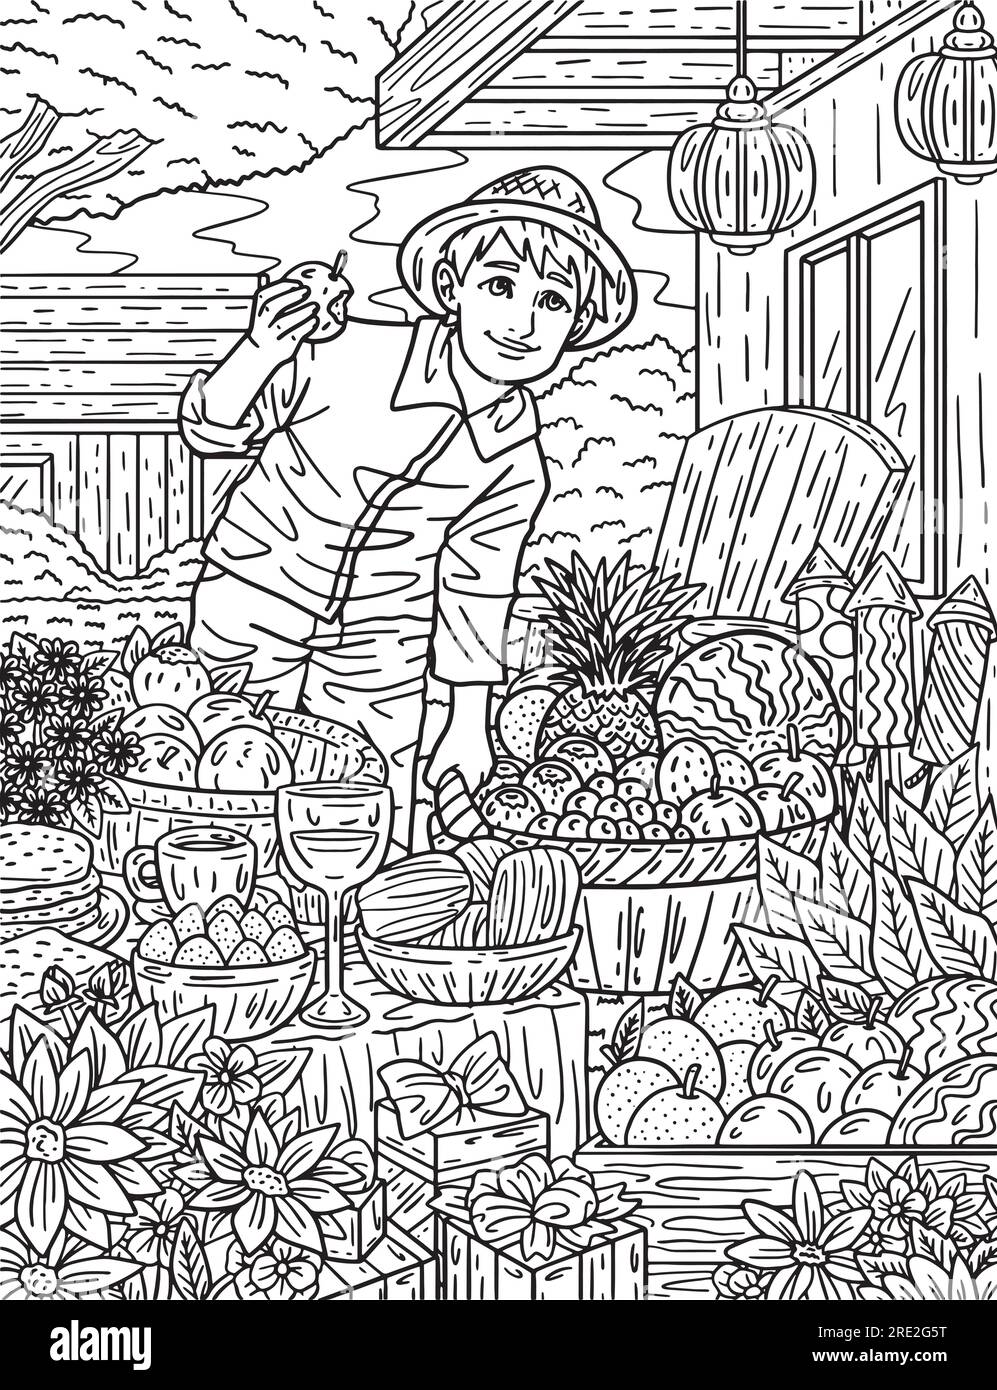 https://c8.alamy.com/comp/2RE2G5T/new-year-boy-with-basket-of-fruits-adults-coloring-2RE2G5T.jpg